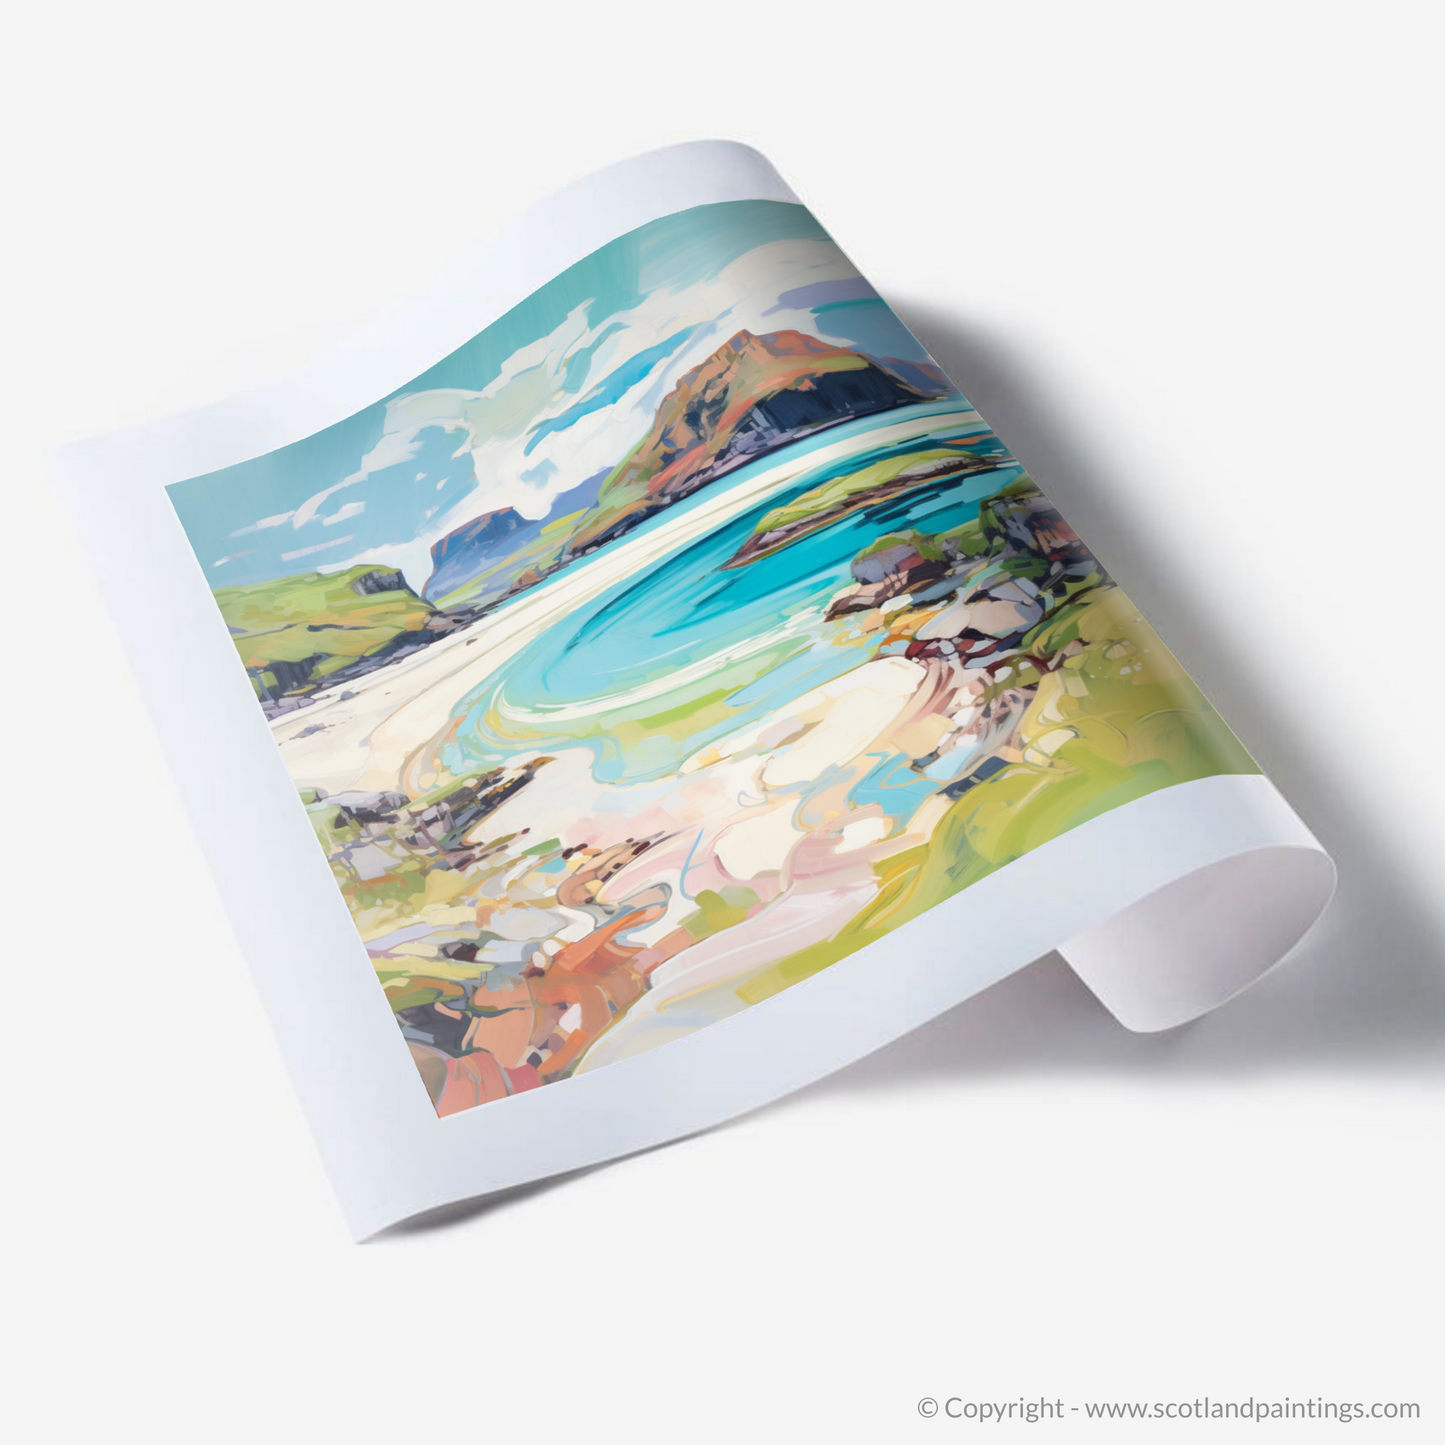 Calgary Bay Summer Vibrance: A Modern Ode to the Isle of Mull